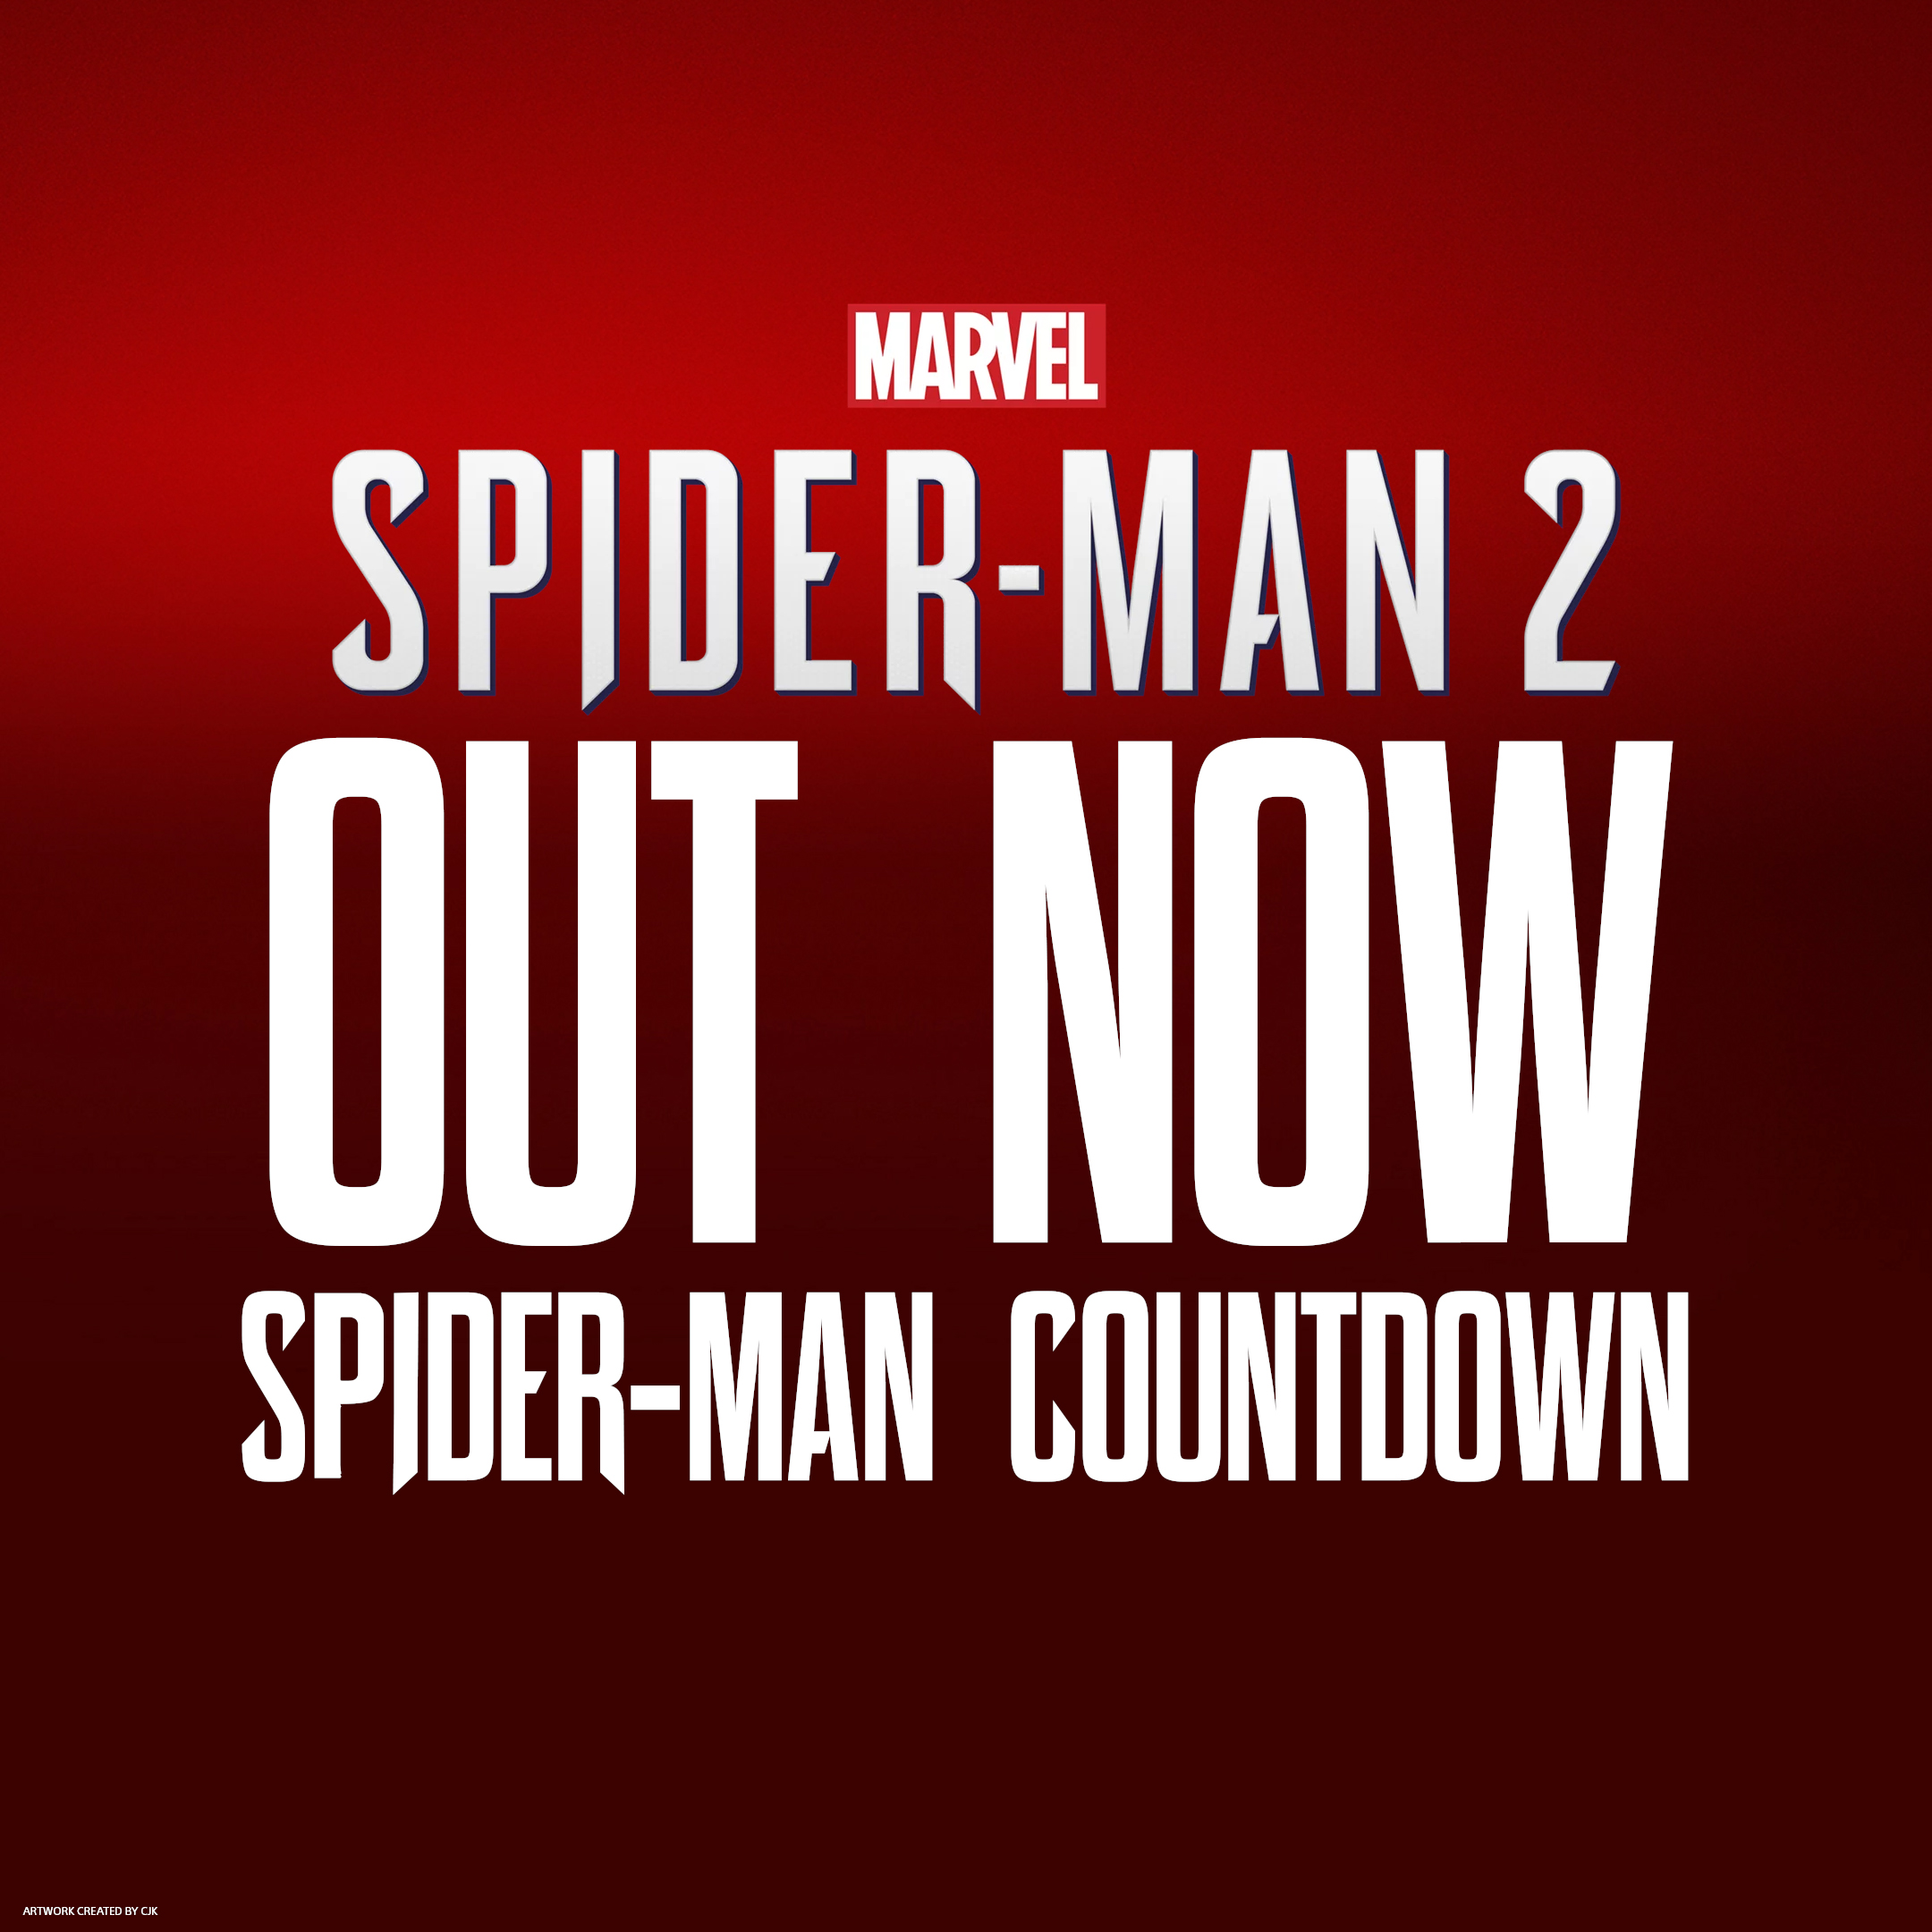 Spider-Man 2 release time countdown